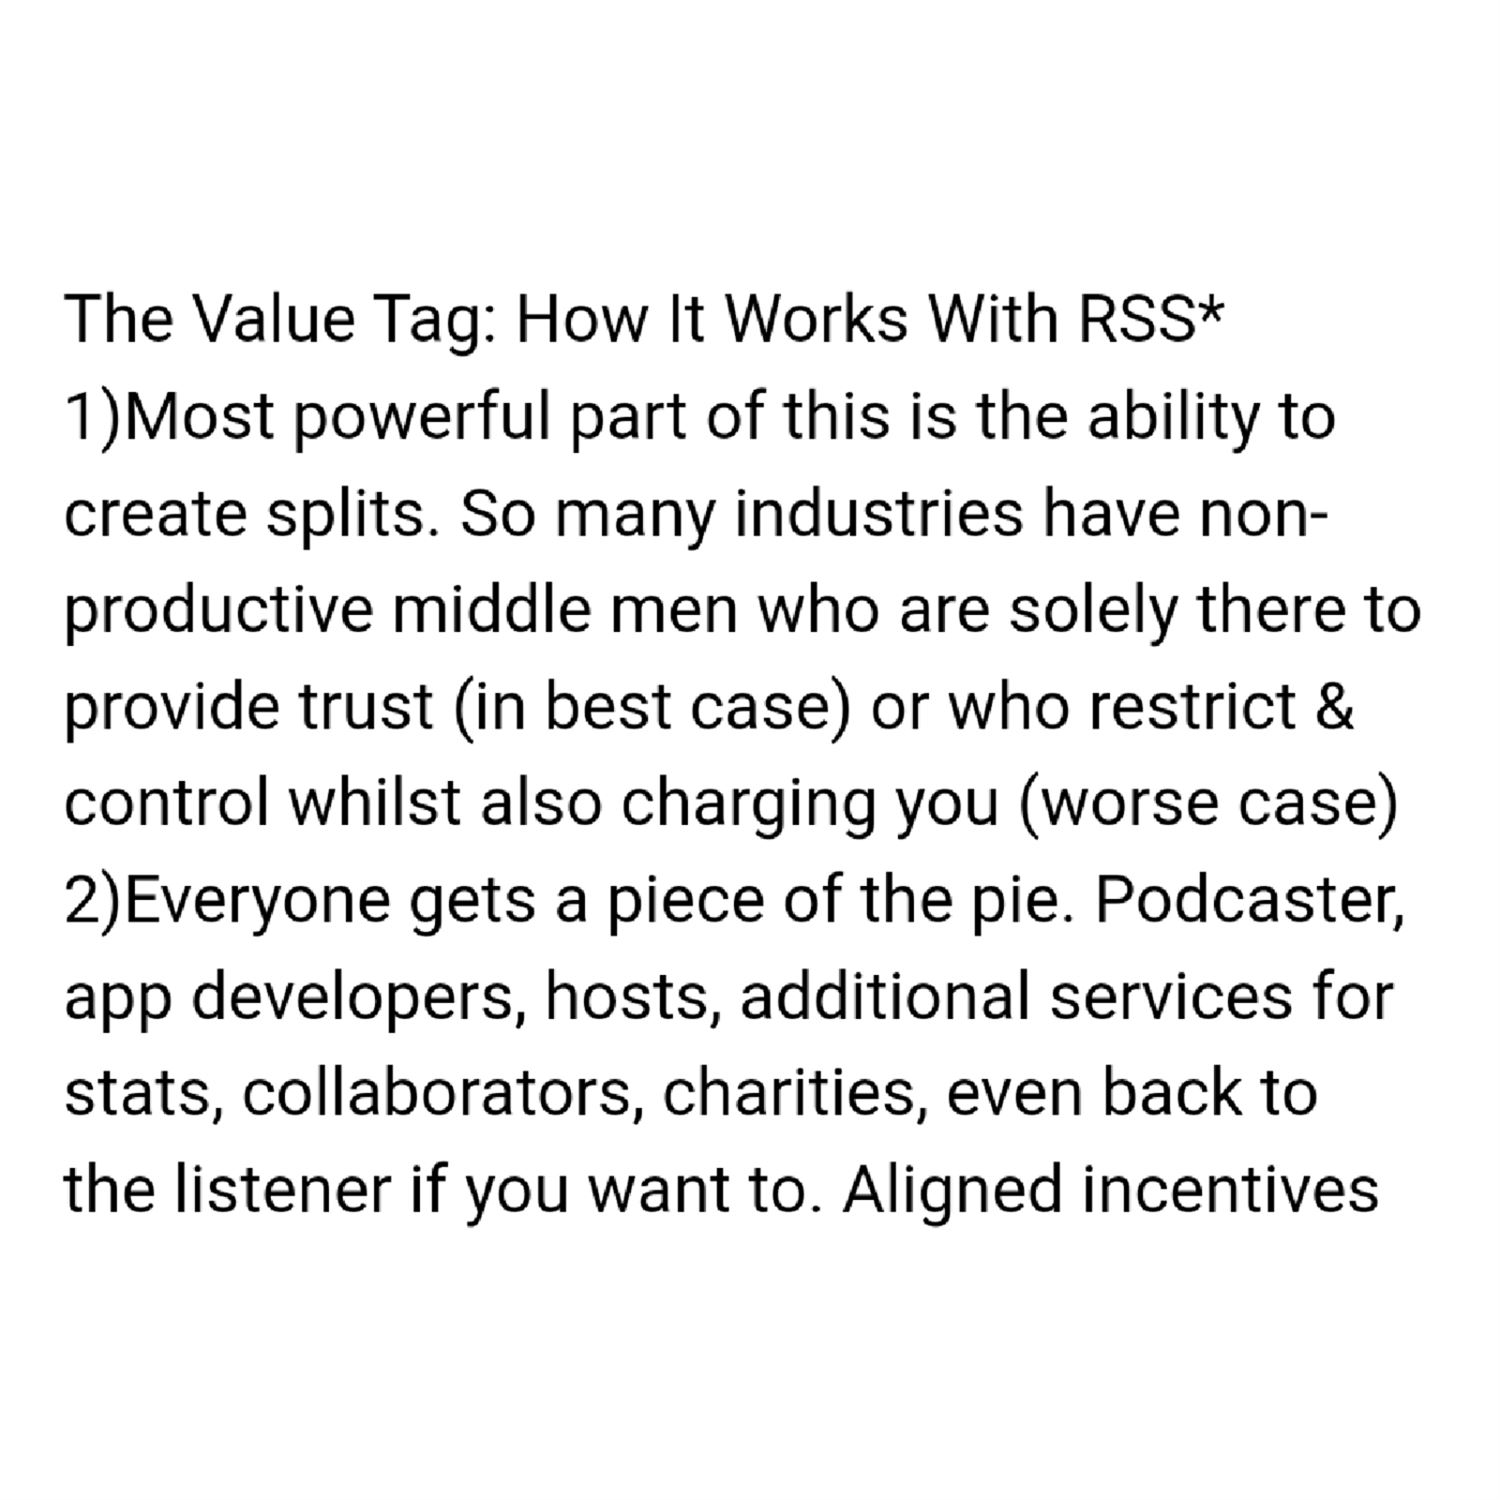 The 'Value' tag